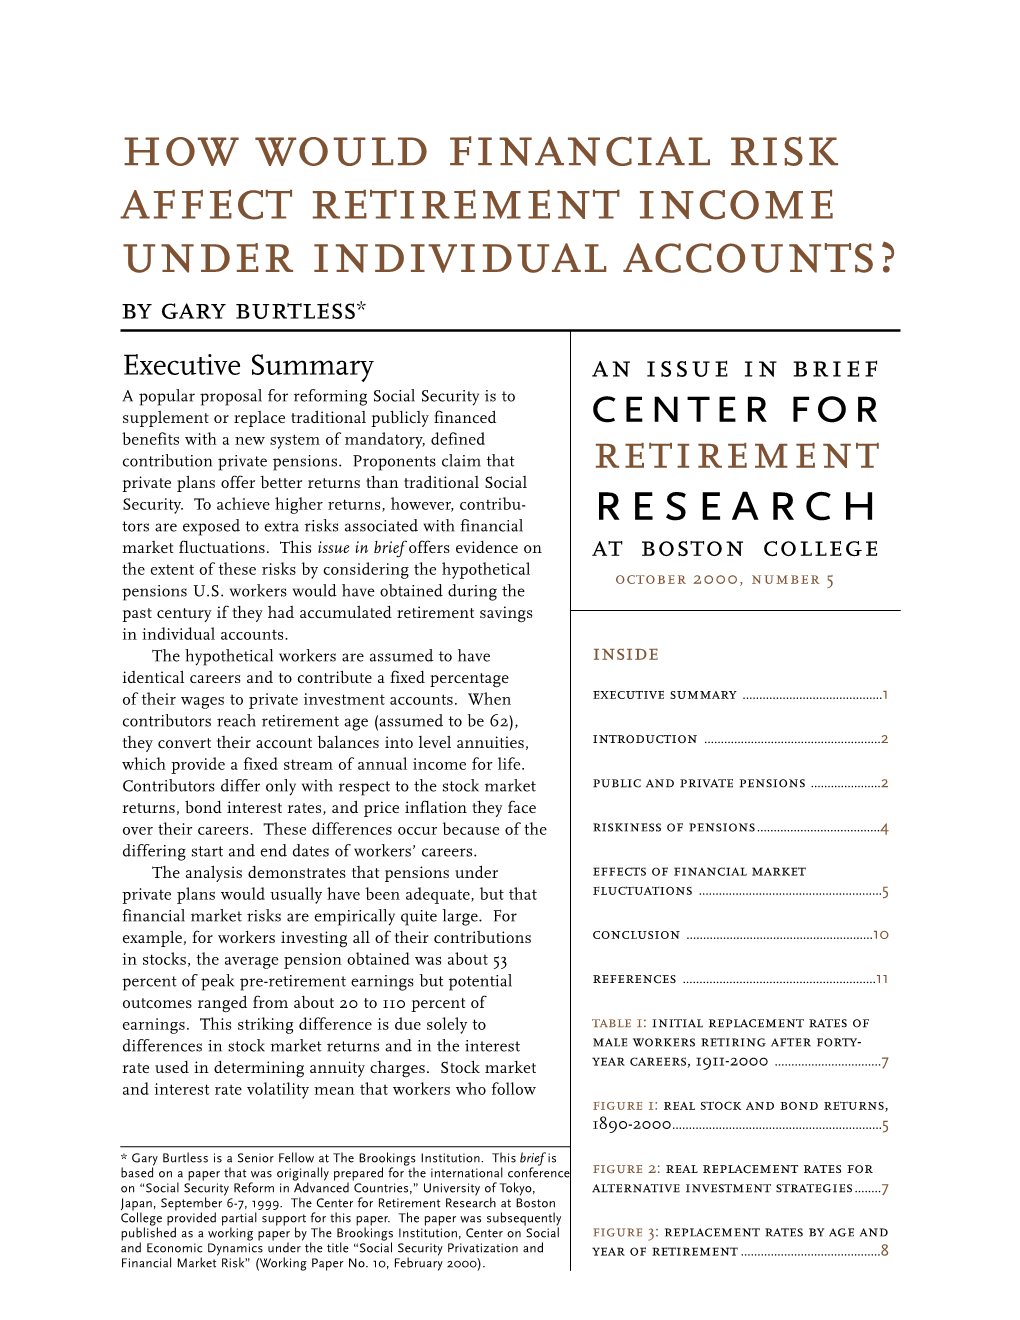 How Would Financial Risk Affect Retirement Income Under Individual Accounts? by Gary Burtless*